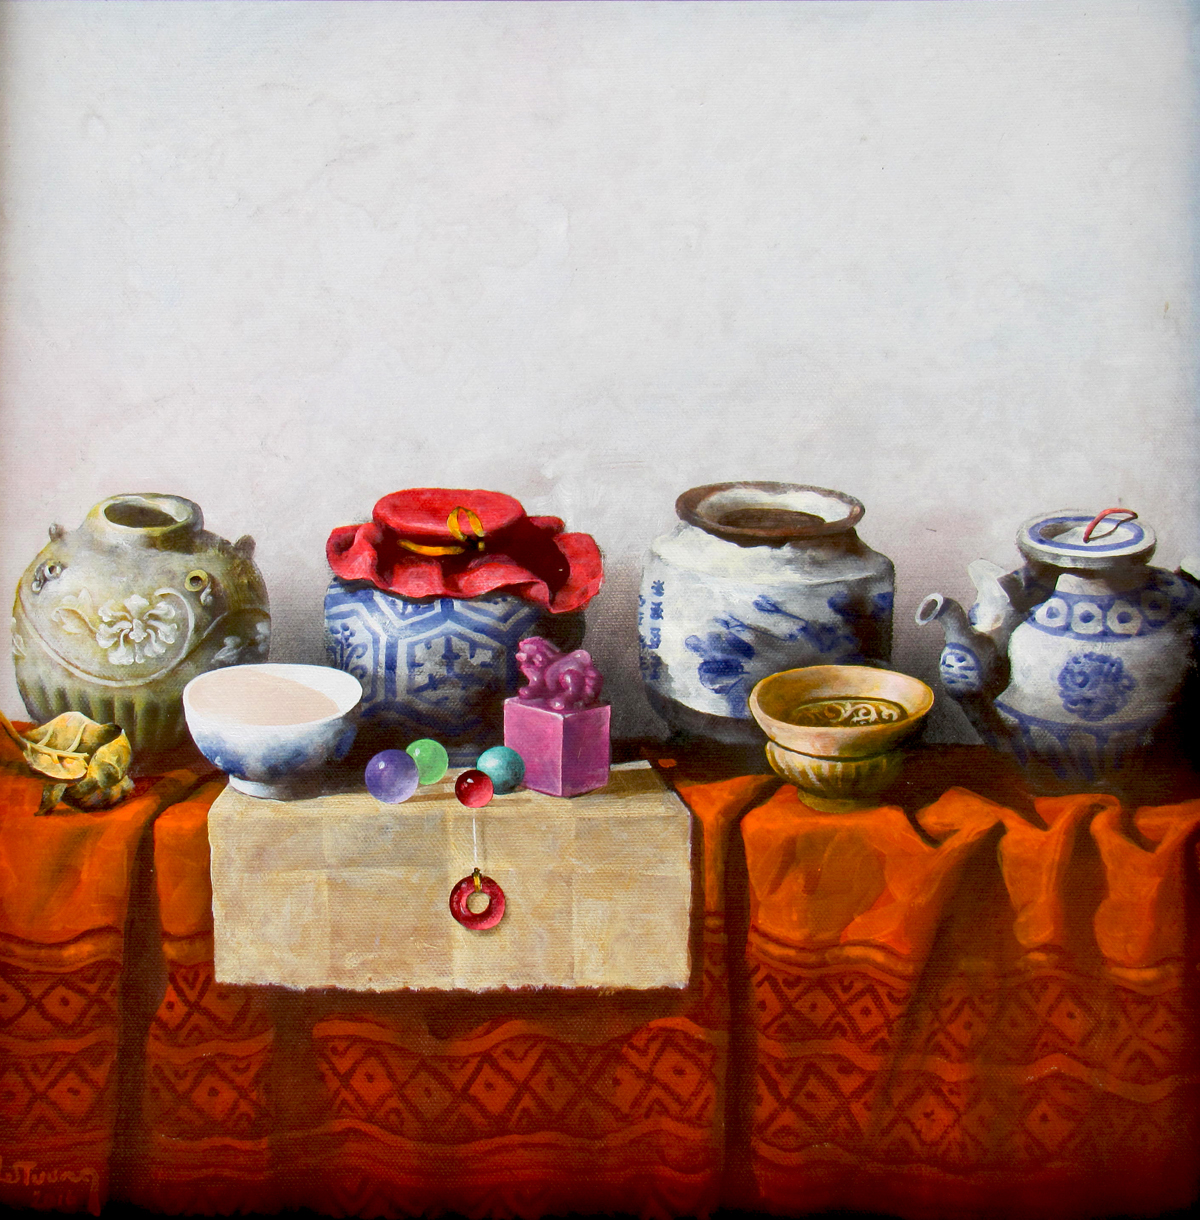 Vietnamese Art-Still Life with Antique Pots, an Oil Painting on Canvas